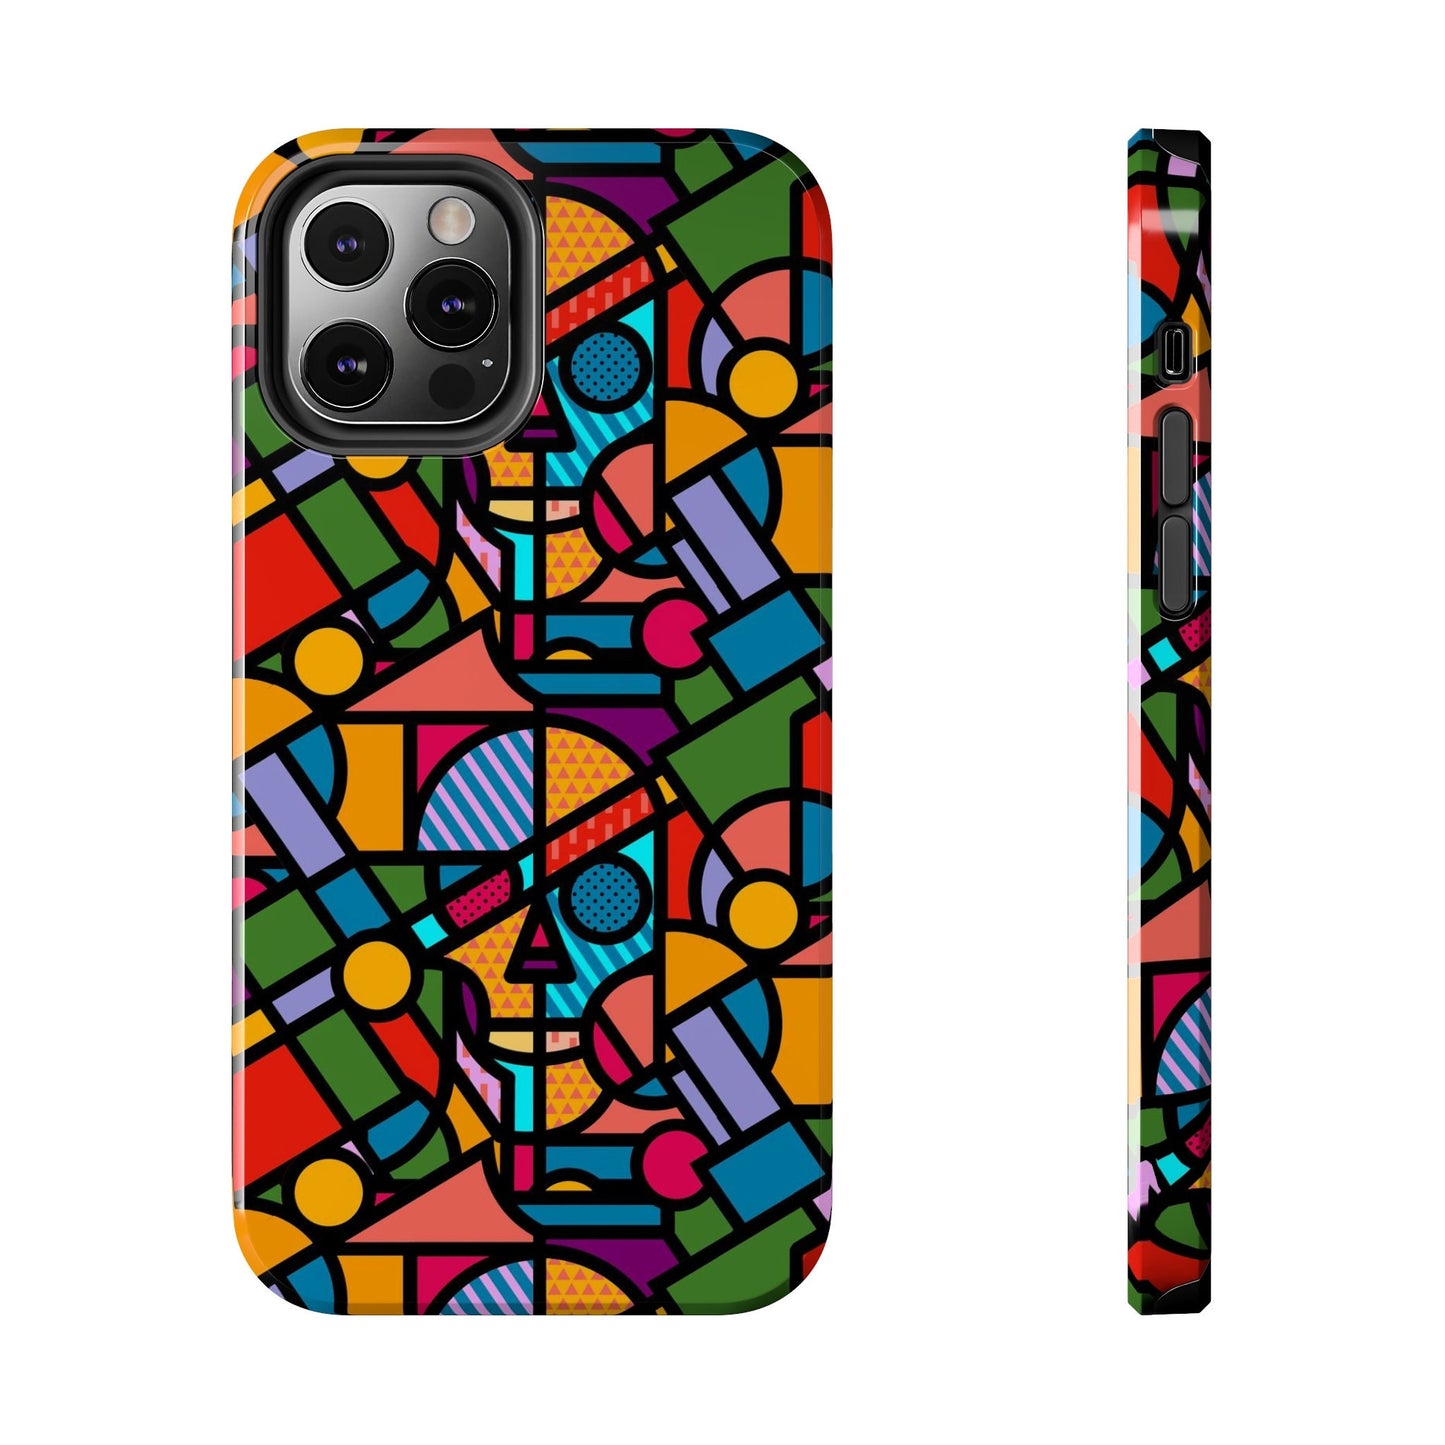 iPhone 15 Case With Skull Design, Pop Art Phone Case, Halloween Phone Decor, iPhone Case with Colorful Geometric Skull Art